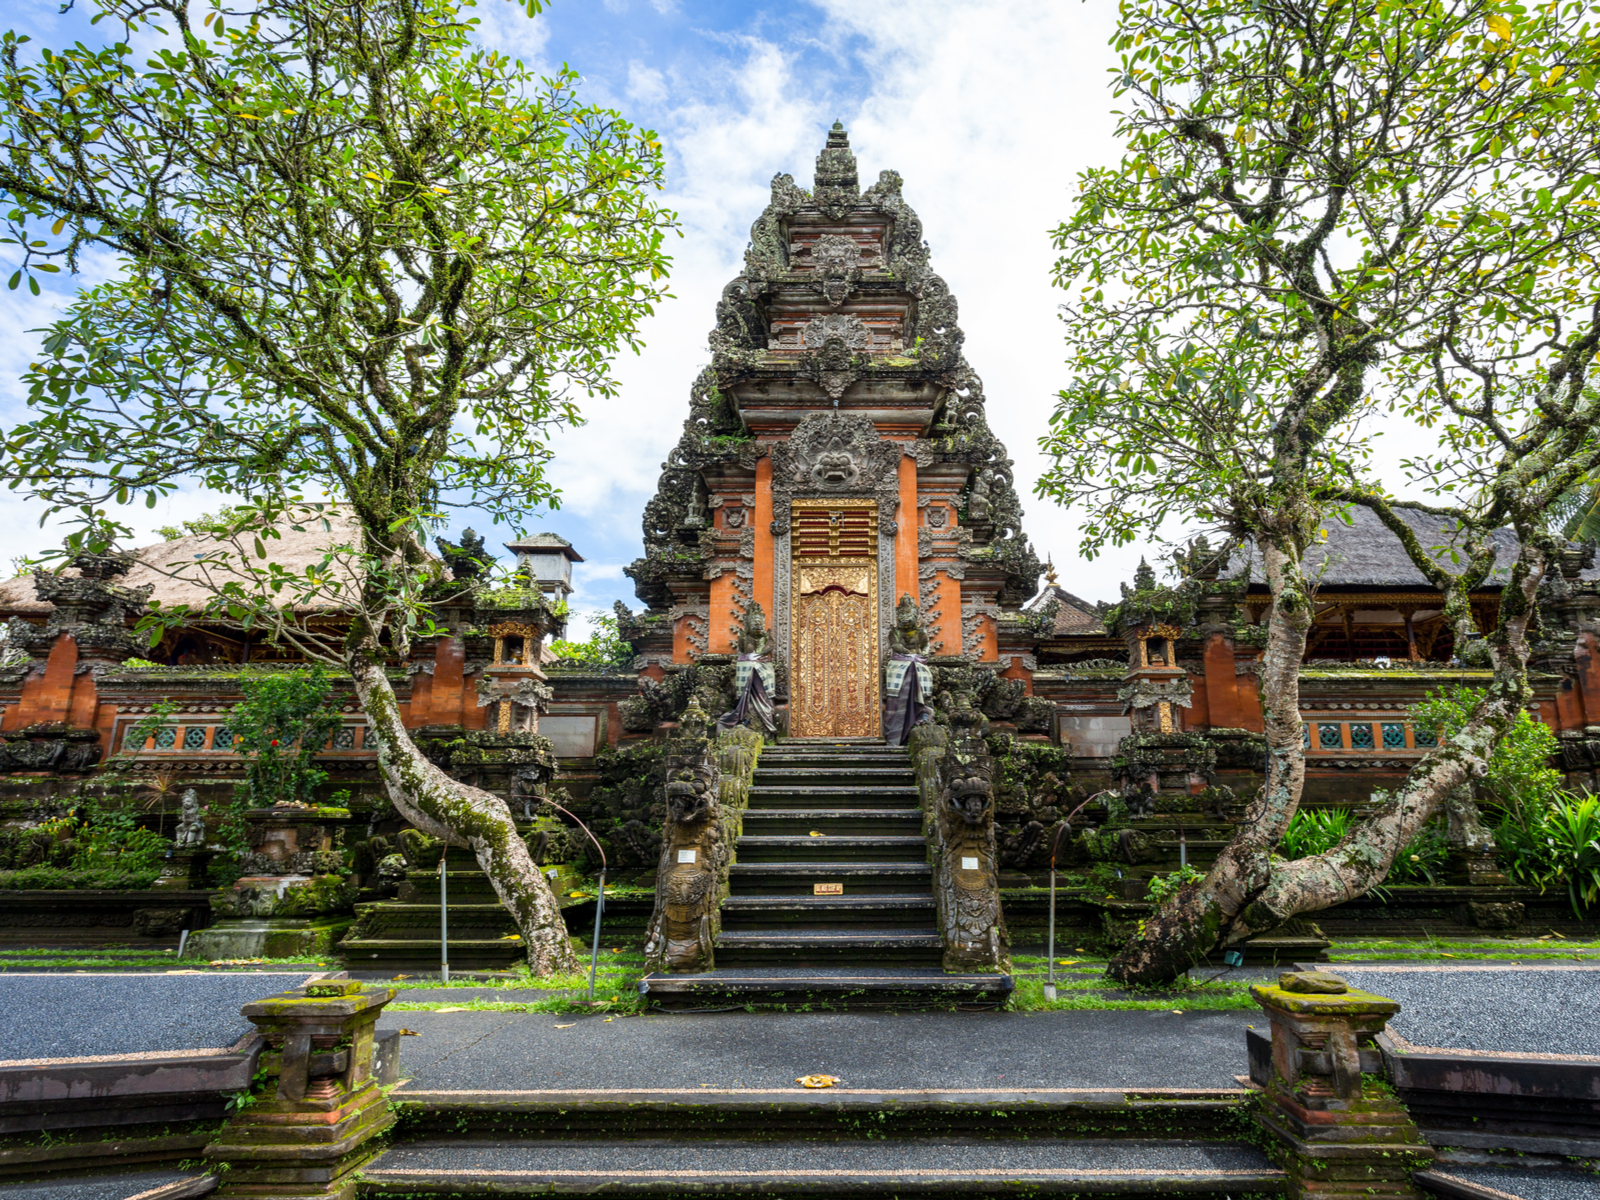 Cool view of the outside of the Pura Taman Saraswati Template in Ubud during the best time to visit Bali